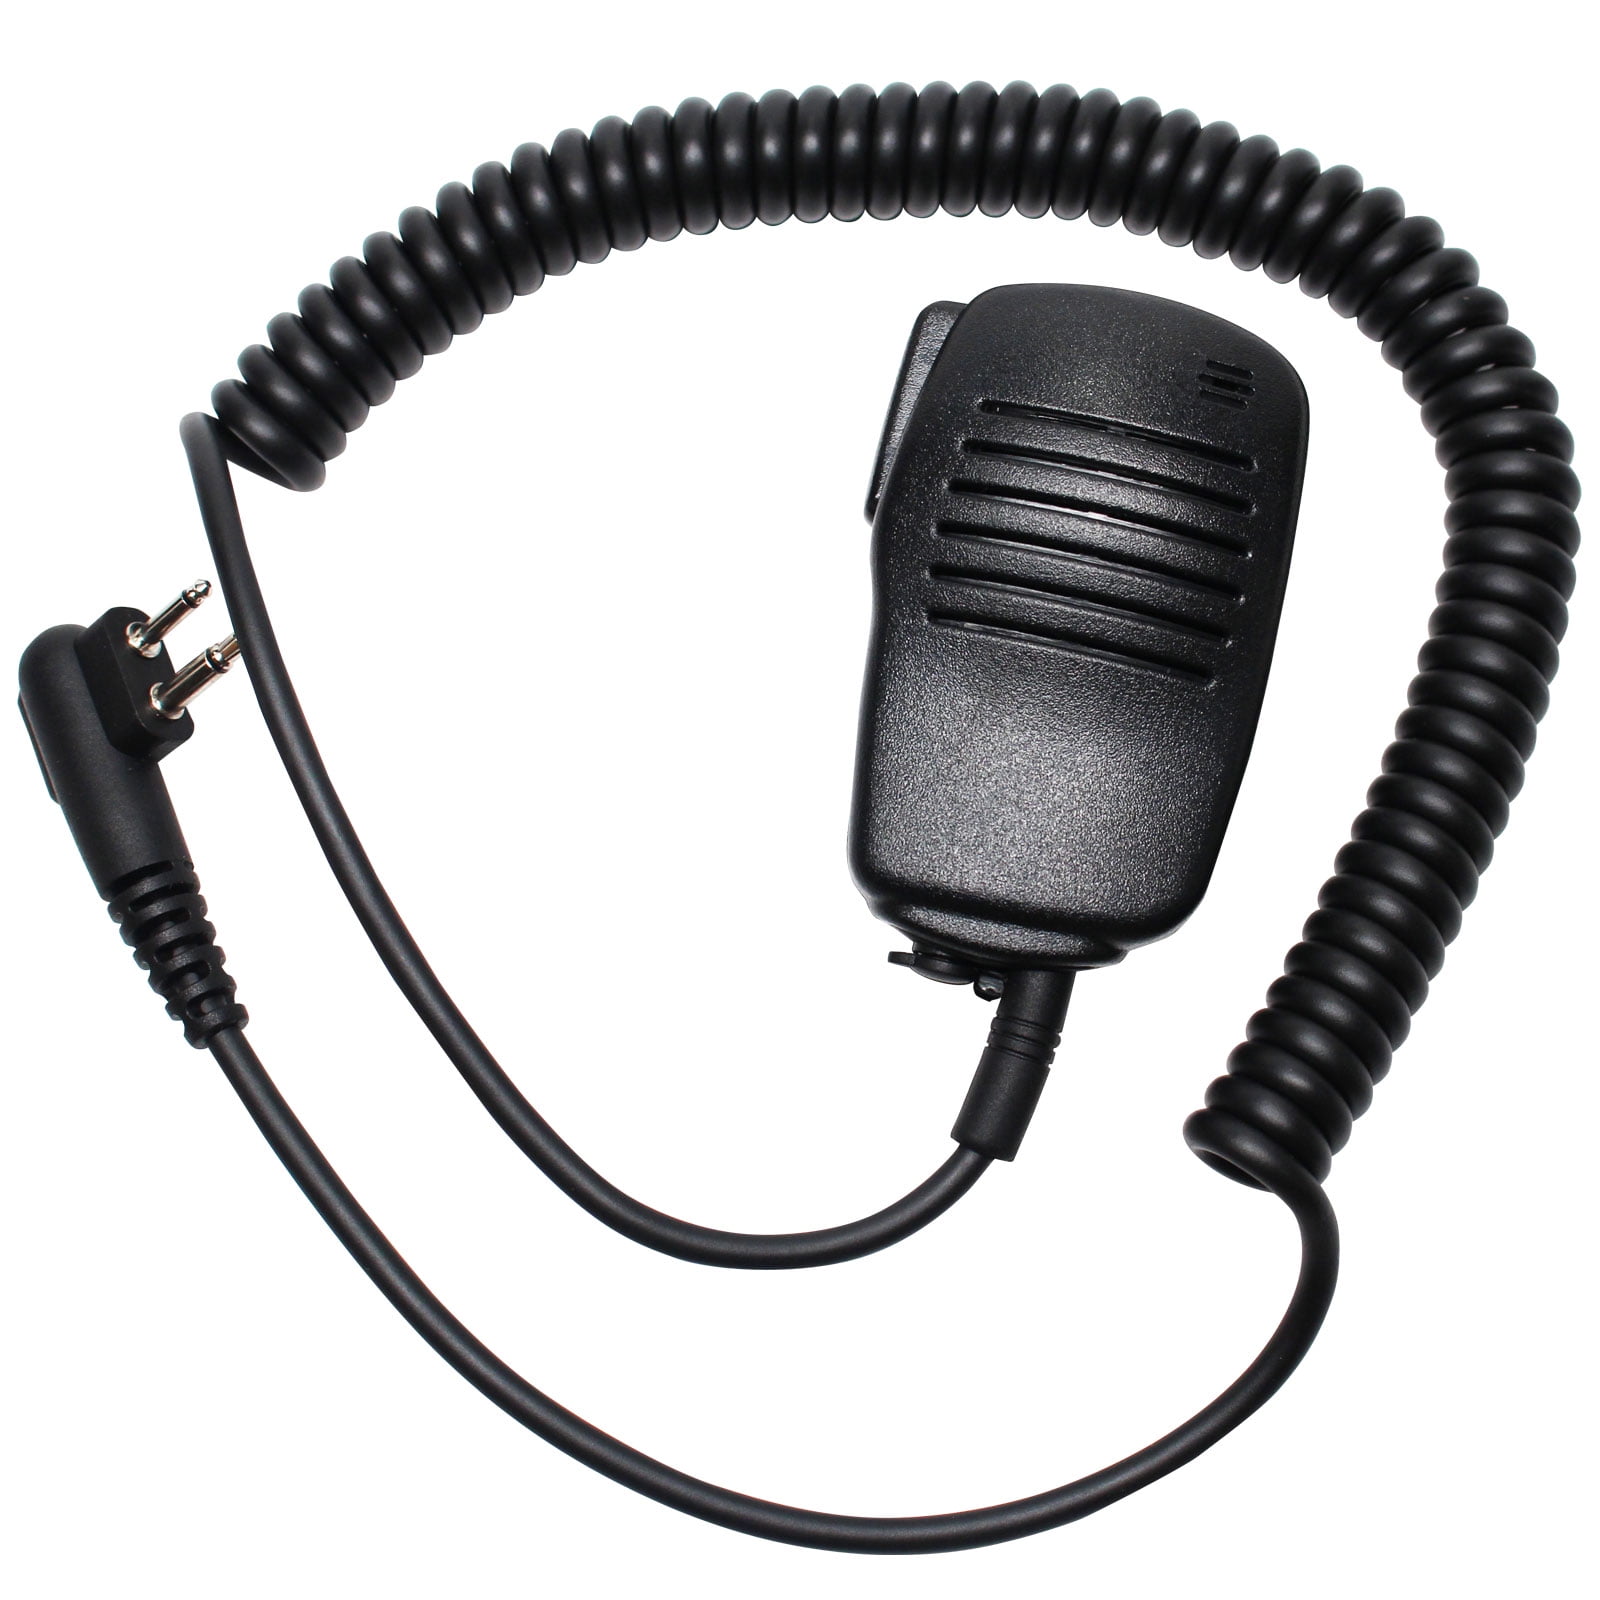 US STOCK High Quality Hand Mic Speaker for Motorola Radio CLS1110/CLS1410/SP50 